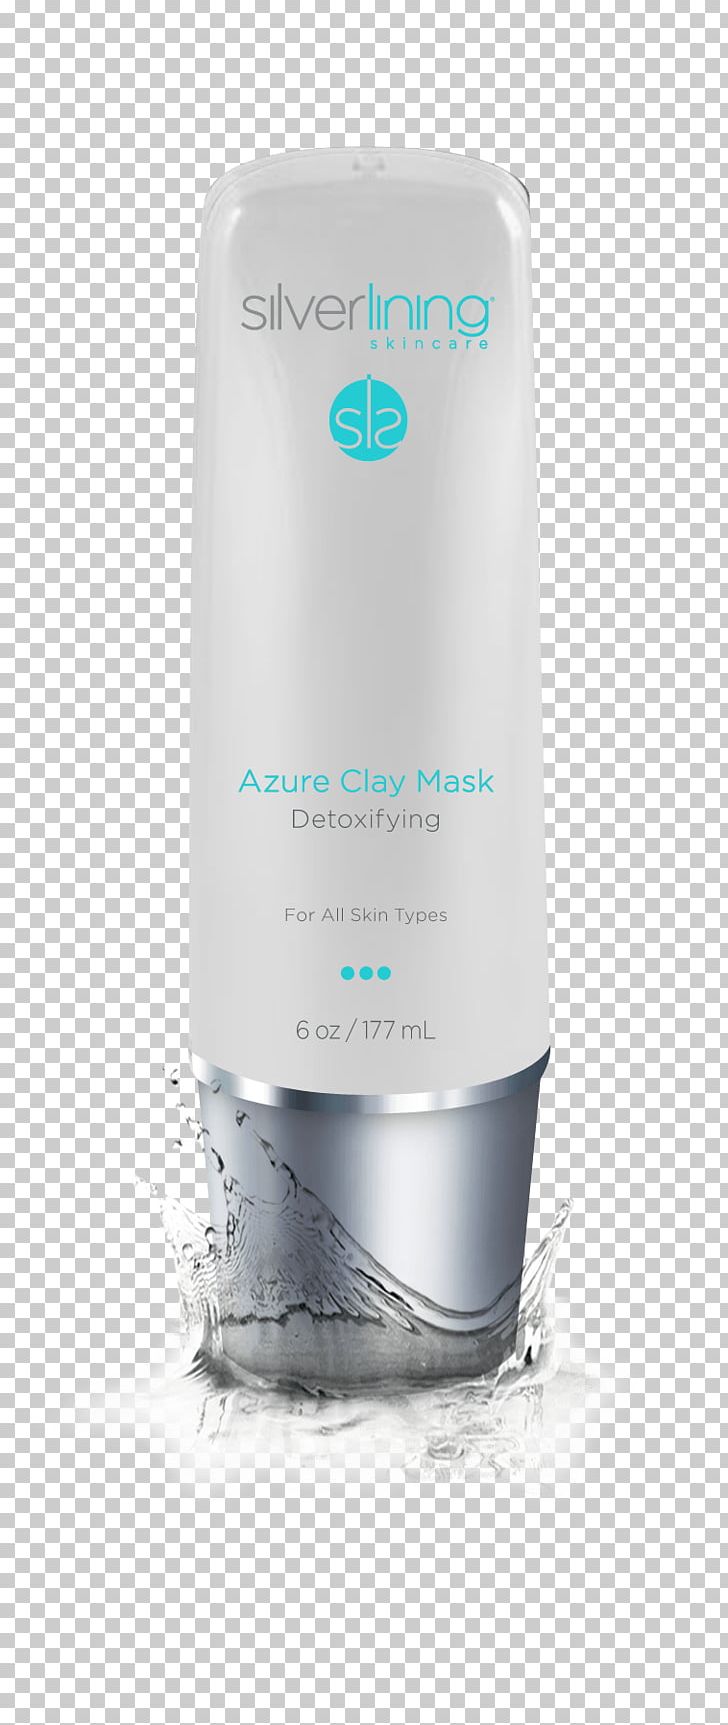 Skin Care Cream Liquid Product PNG, Clipart, Beauty, Cream, Essential Oil, Health, Liquid Free PNG Download